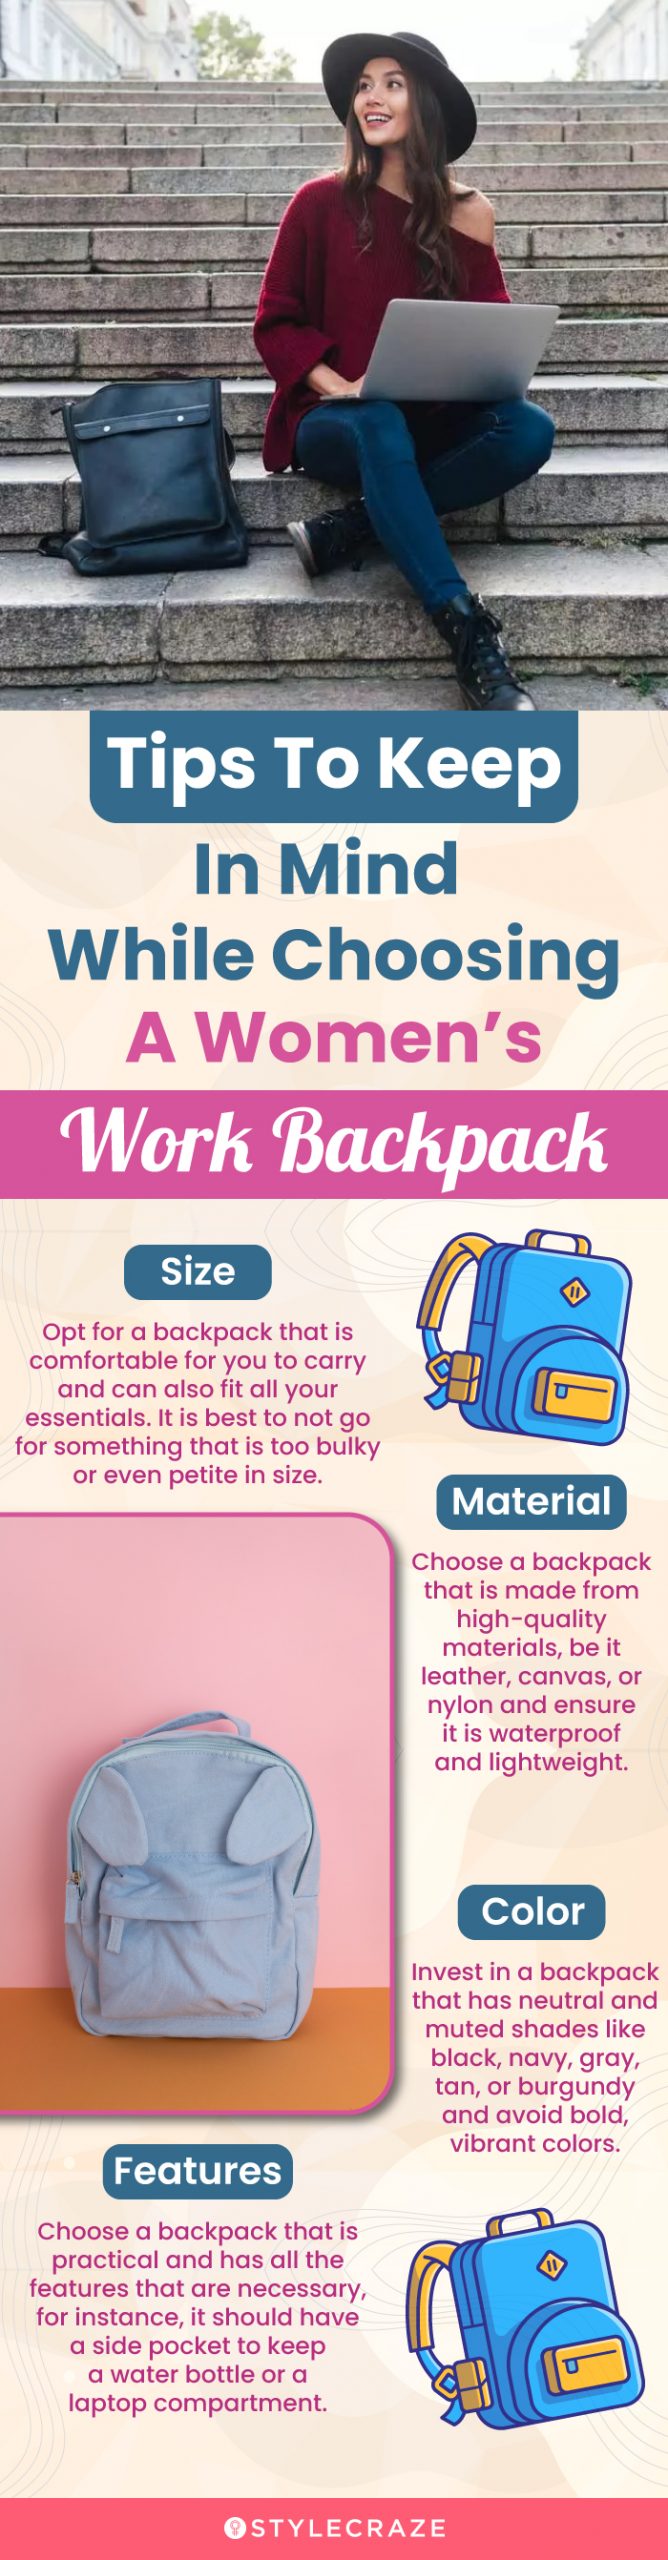 Tips To Keep In Mind While Choosing A Women’s Work Backpack (infographic)